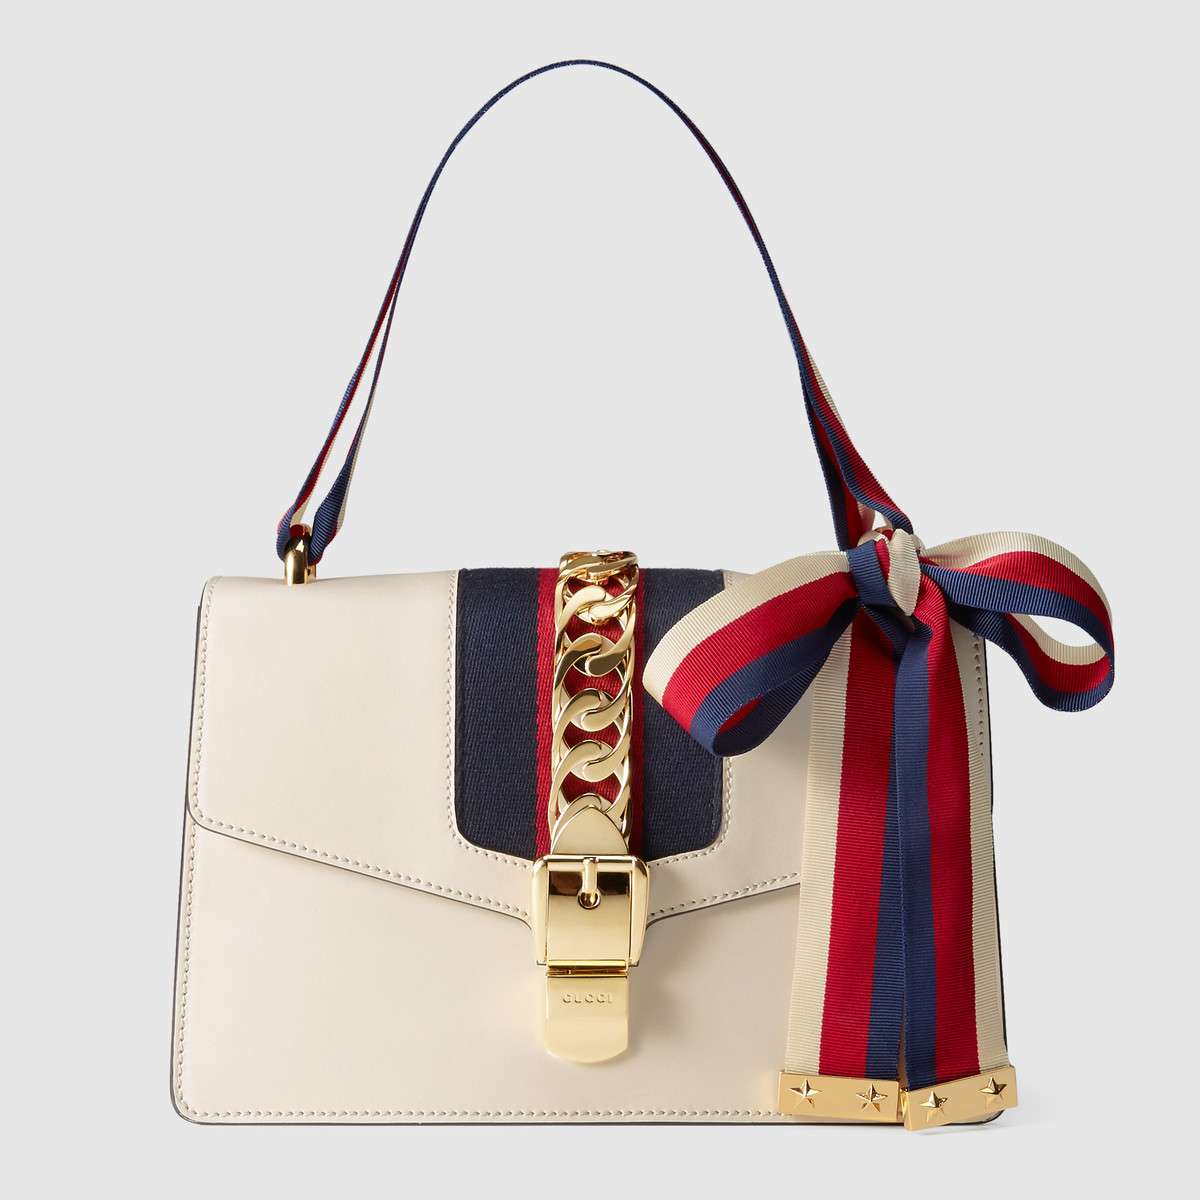  Gucci  Sylvie Small  Shoulder Bag in Smooth Leather LULUX